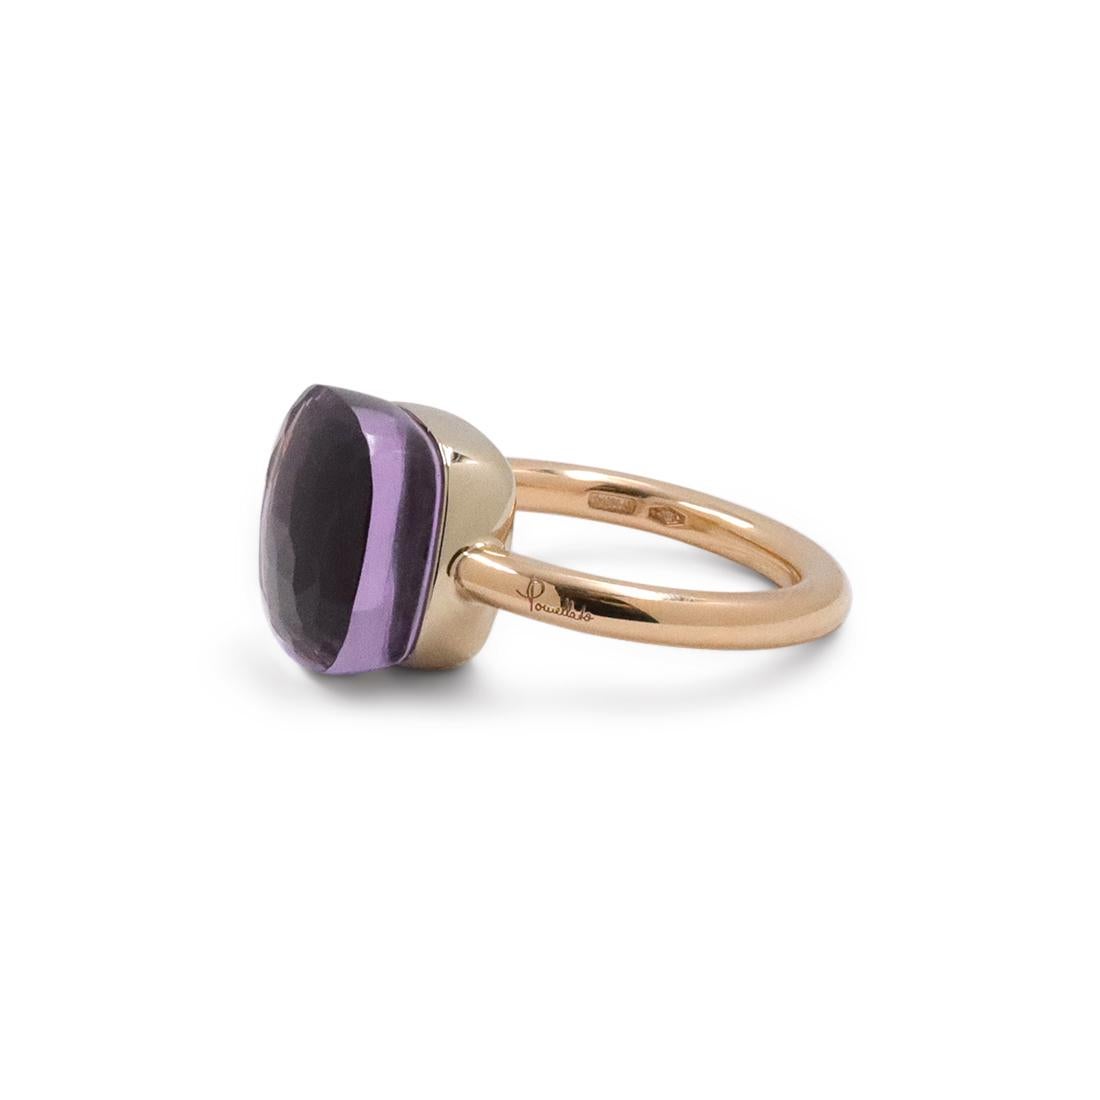 Authentic Pomellato Nudo Classic ring crafted in 18 karat rose gold and featuring a faceted amethyst stone measuring 12.5mm x 12.5mm. Signed Pomellato. Ring size 5 3/4. The ring is presented with the original box, no papers. CIRCA 2010s.

Brand: